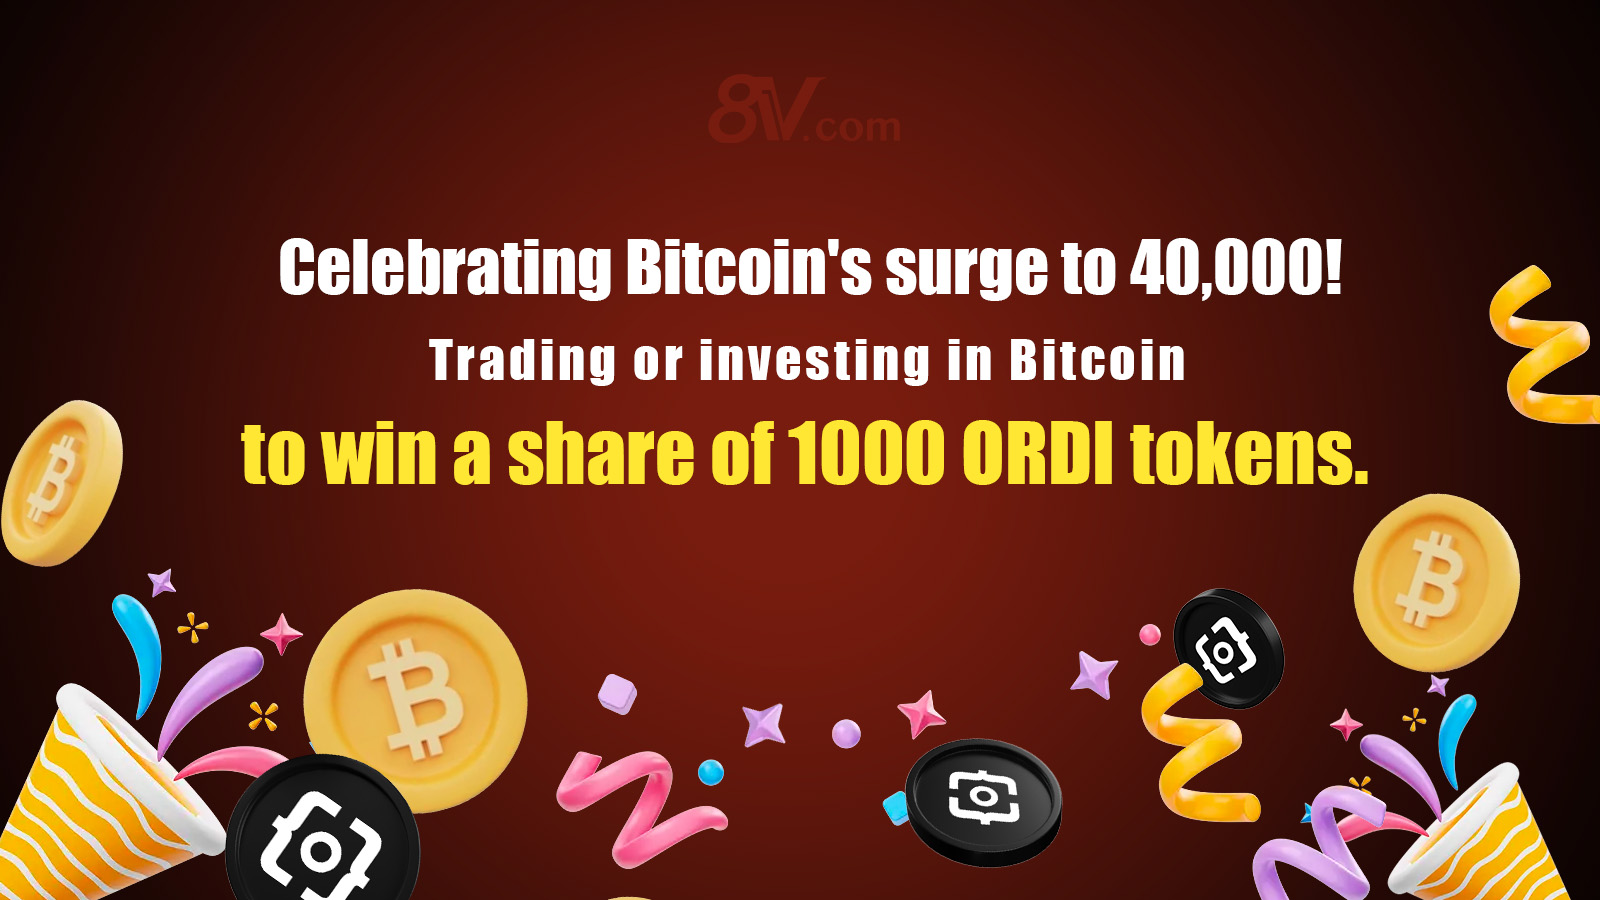 BTC at 40,000! Auto-invest BTC to win a Share of 1000 ORDI